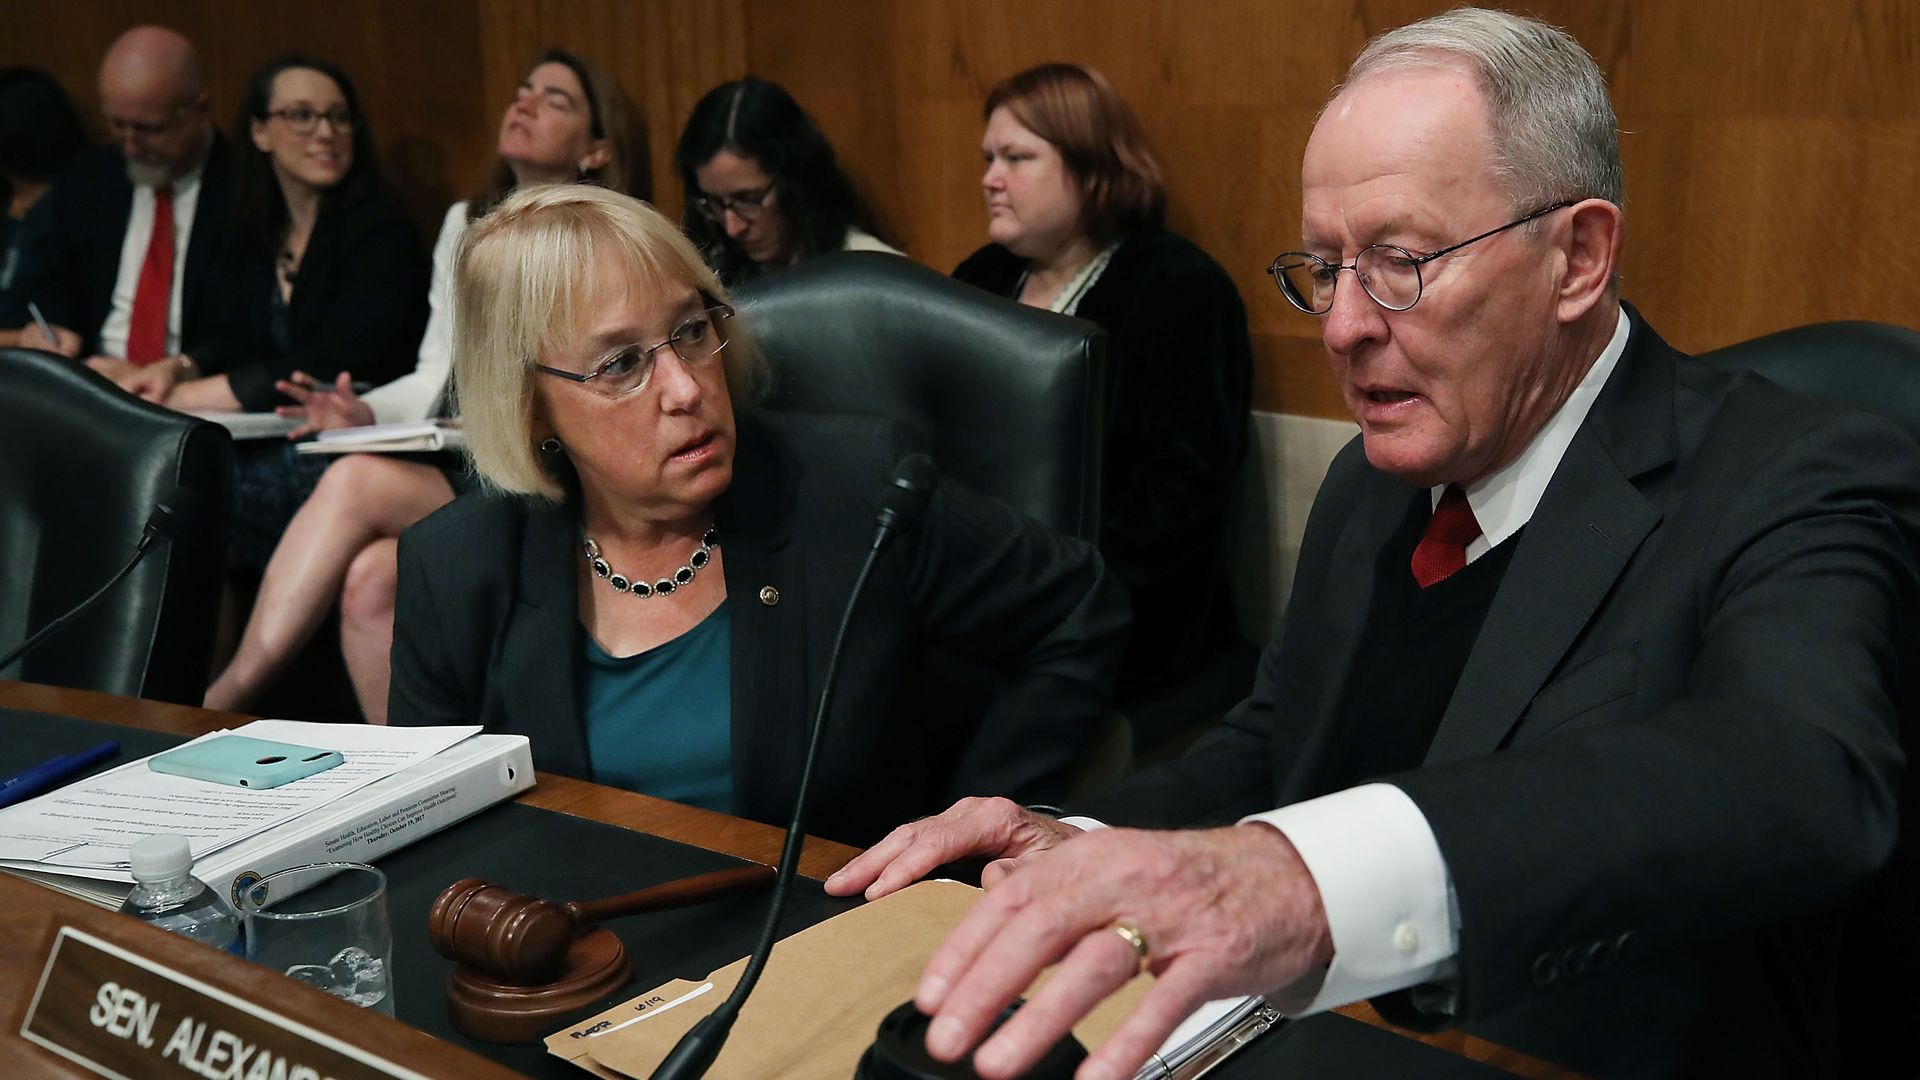 In this image, Sens. Murray and Alexander talk while one reaches for coffee. 